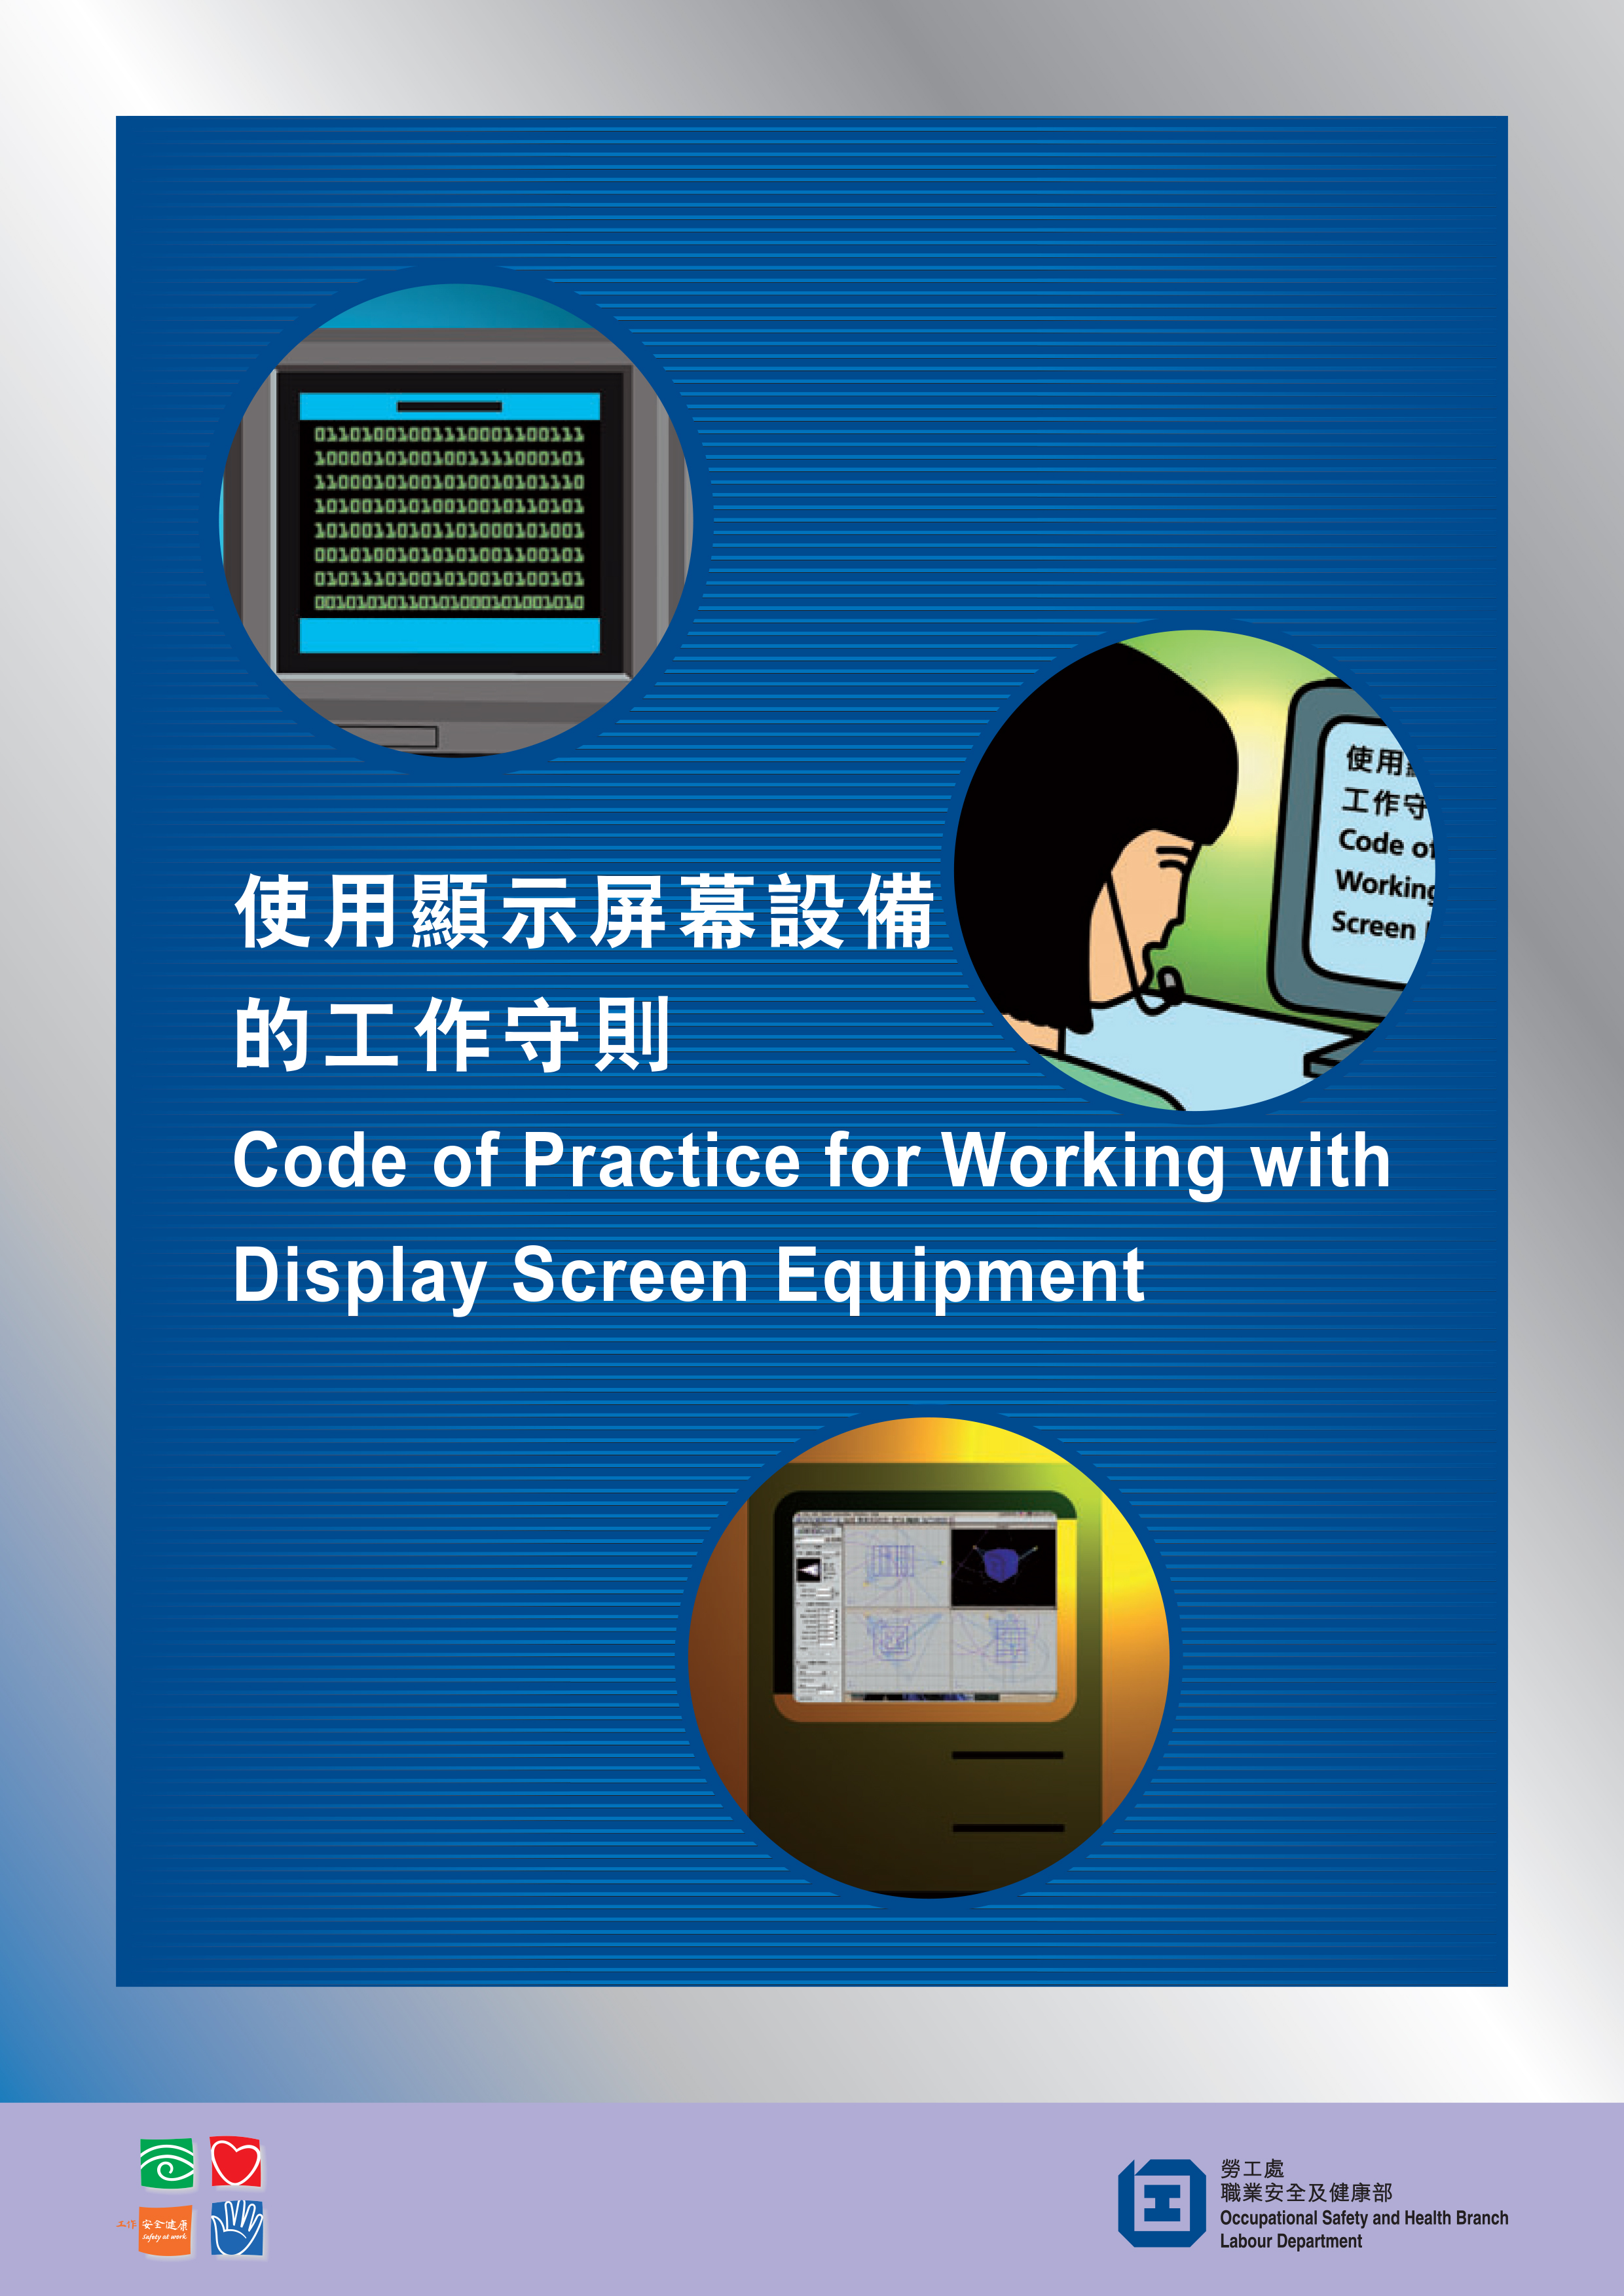 Code of Practice for Working with Display Screen Equipment (published by the Labour Department)